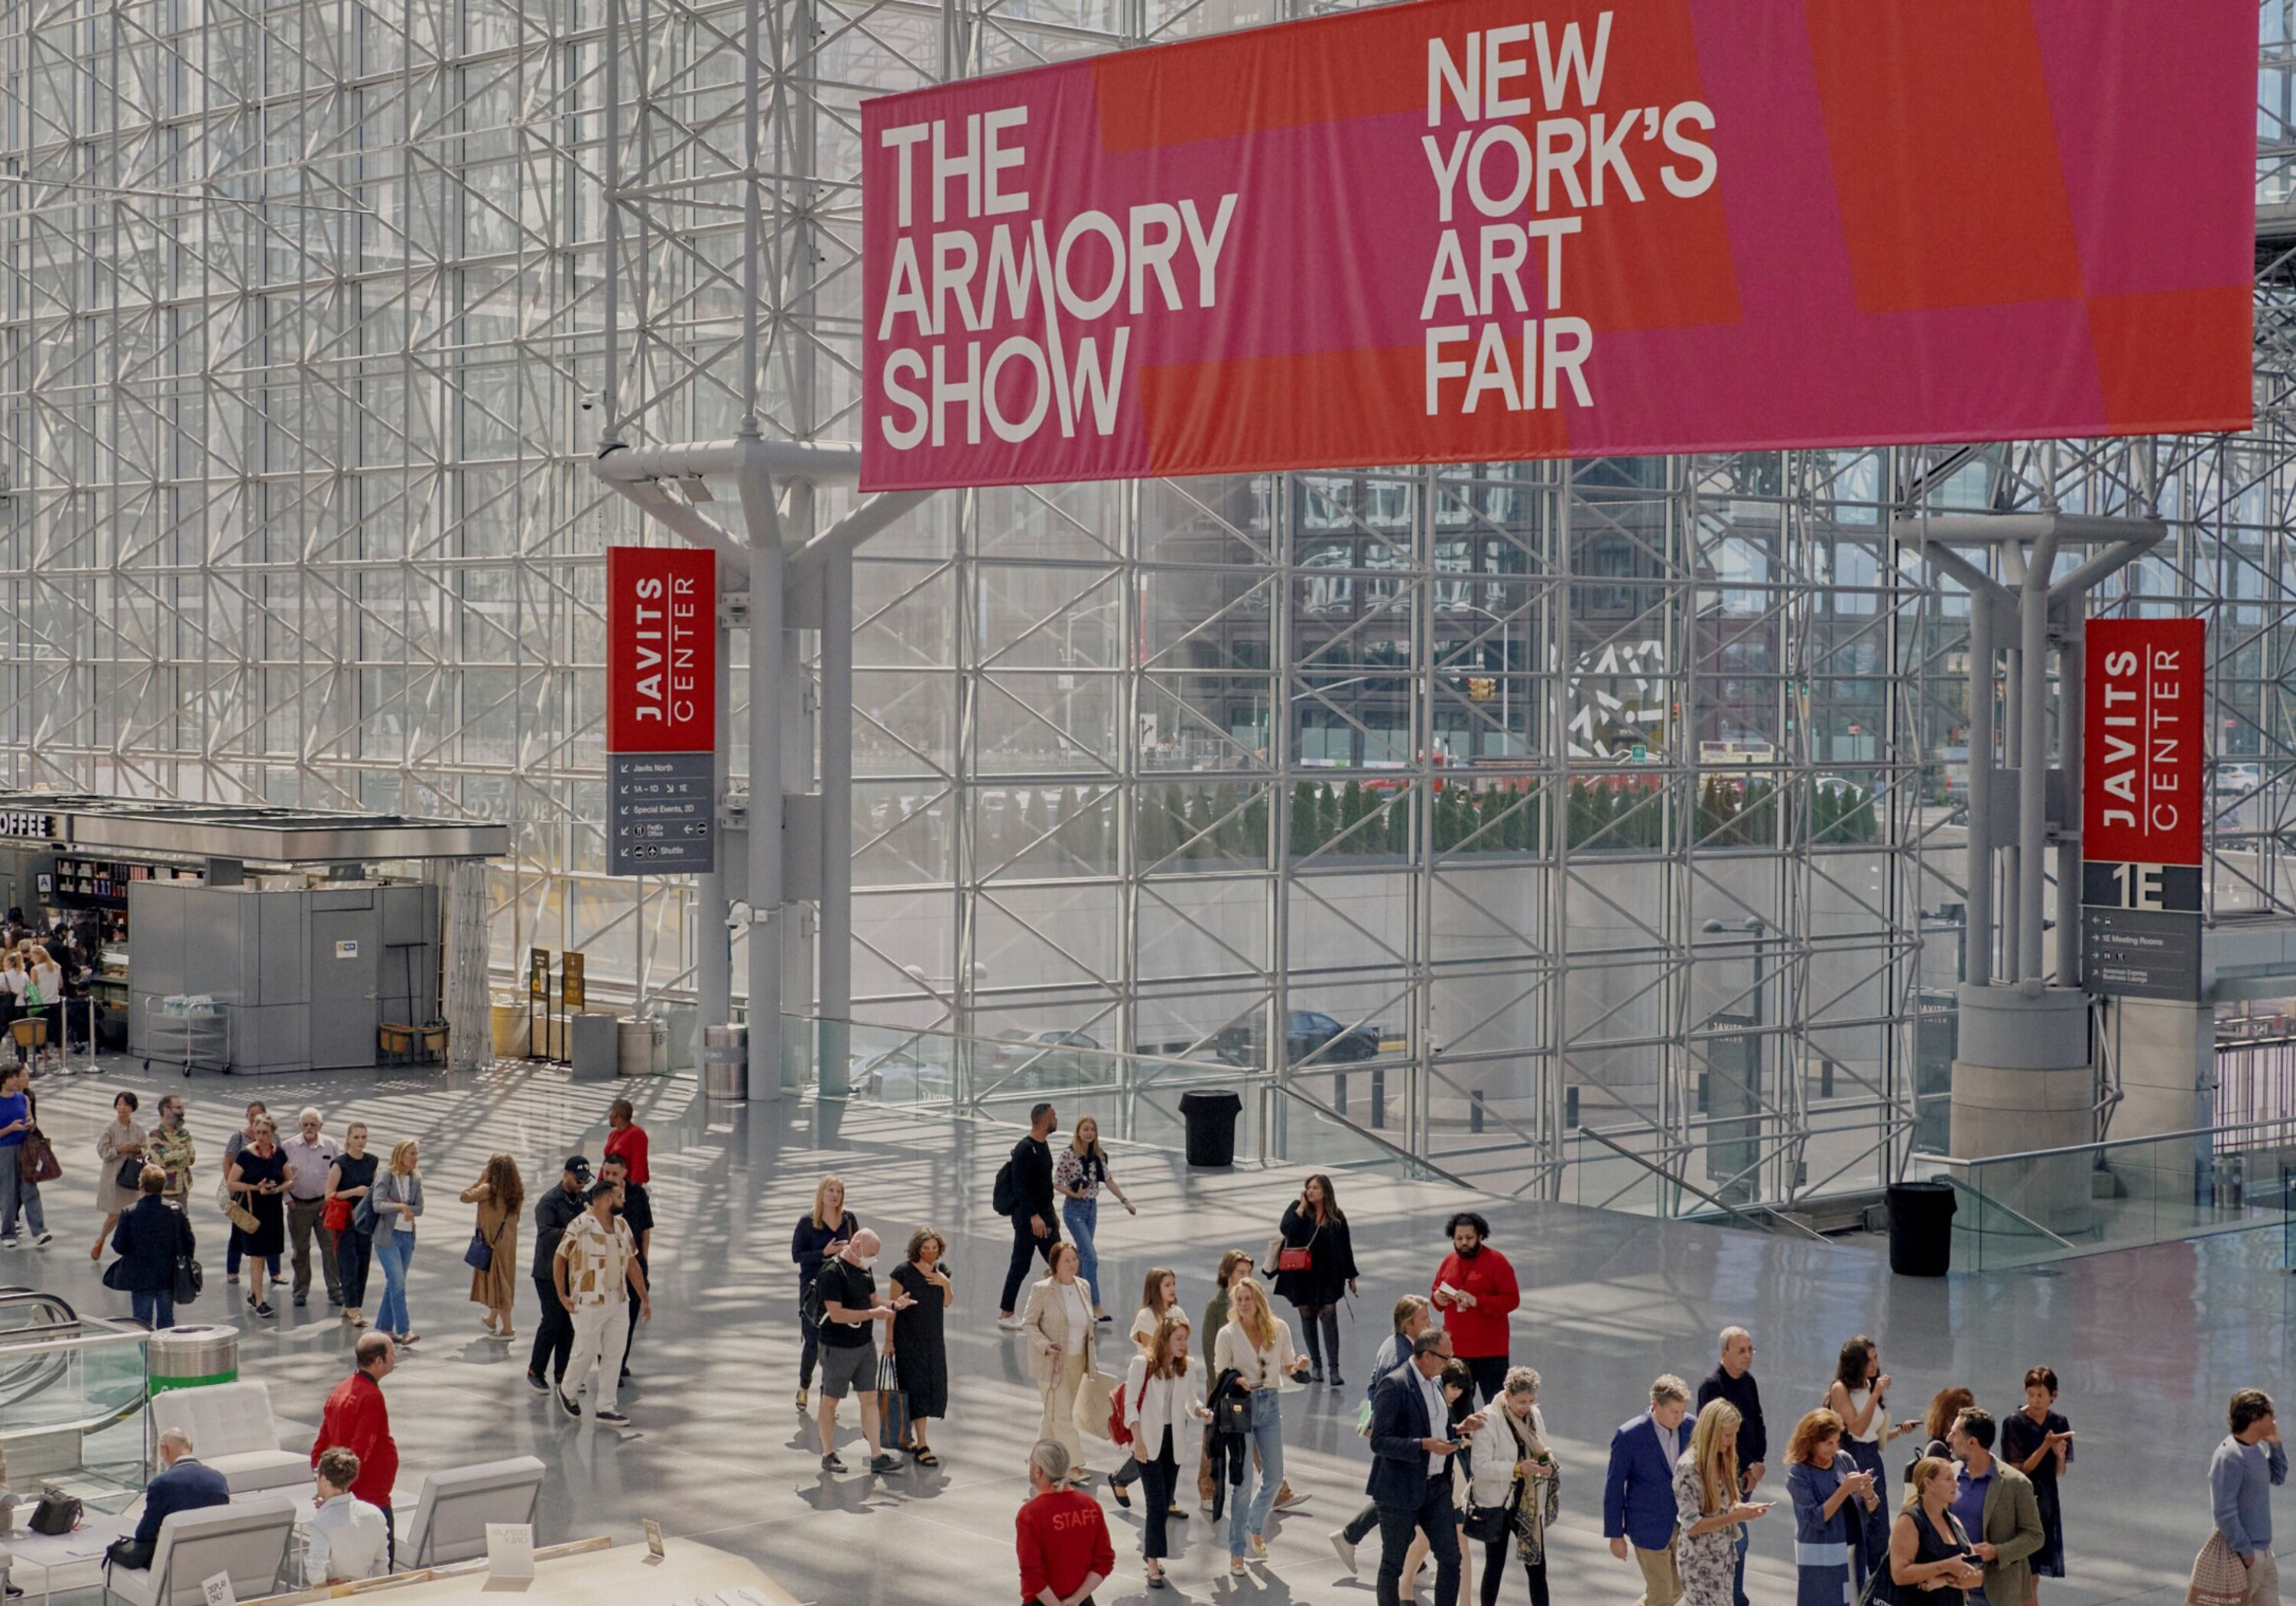 Guests entering The Armory Show at The Javits Center in New York City